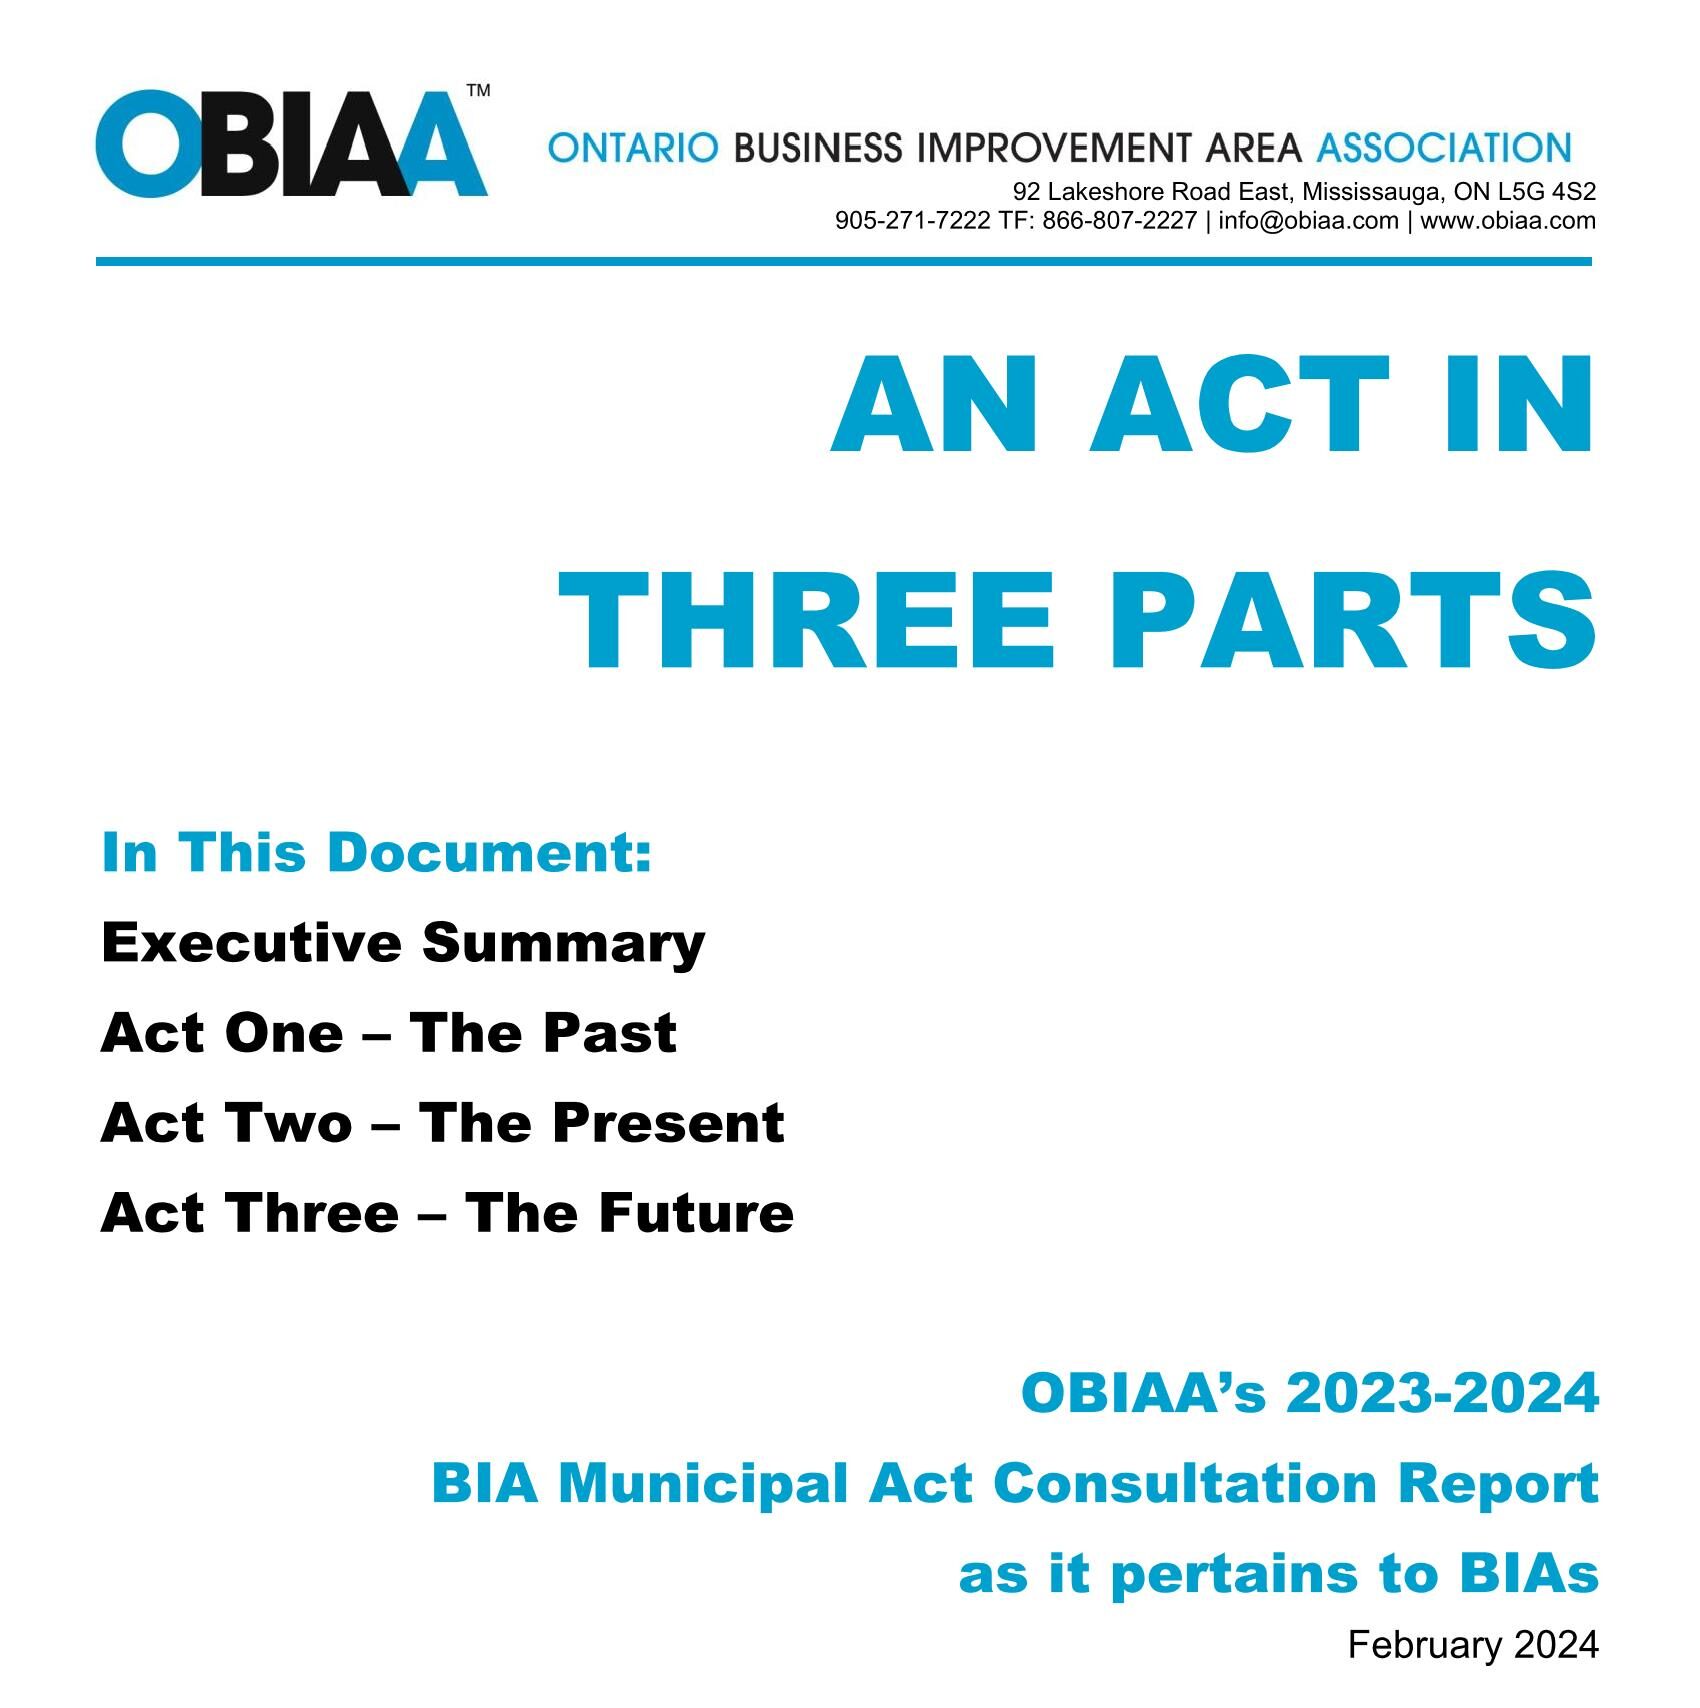 Image of front page of Municipal Act for BIAs Consultation Report